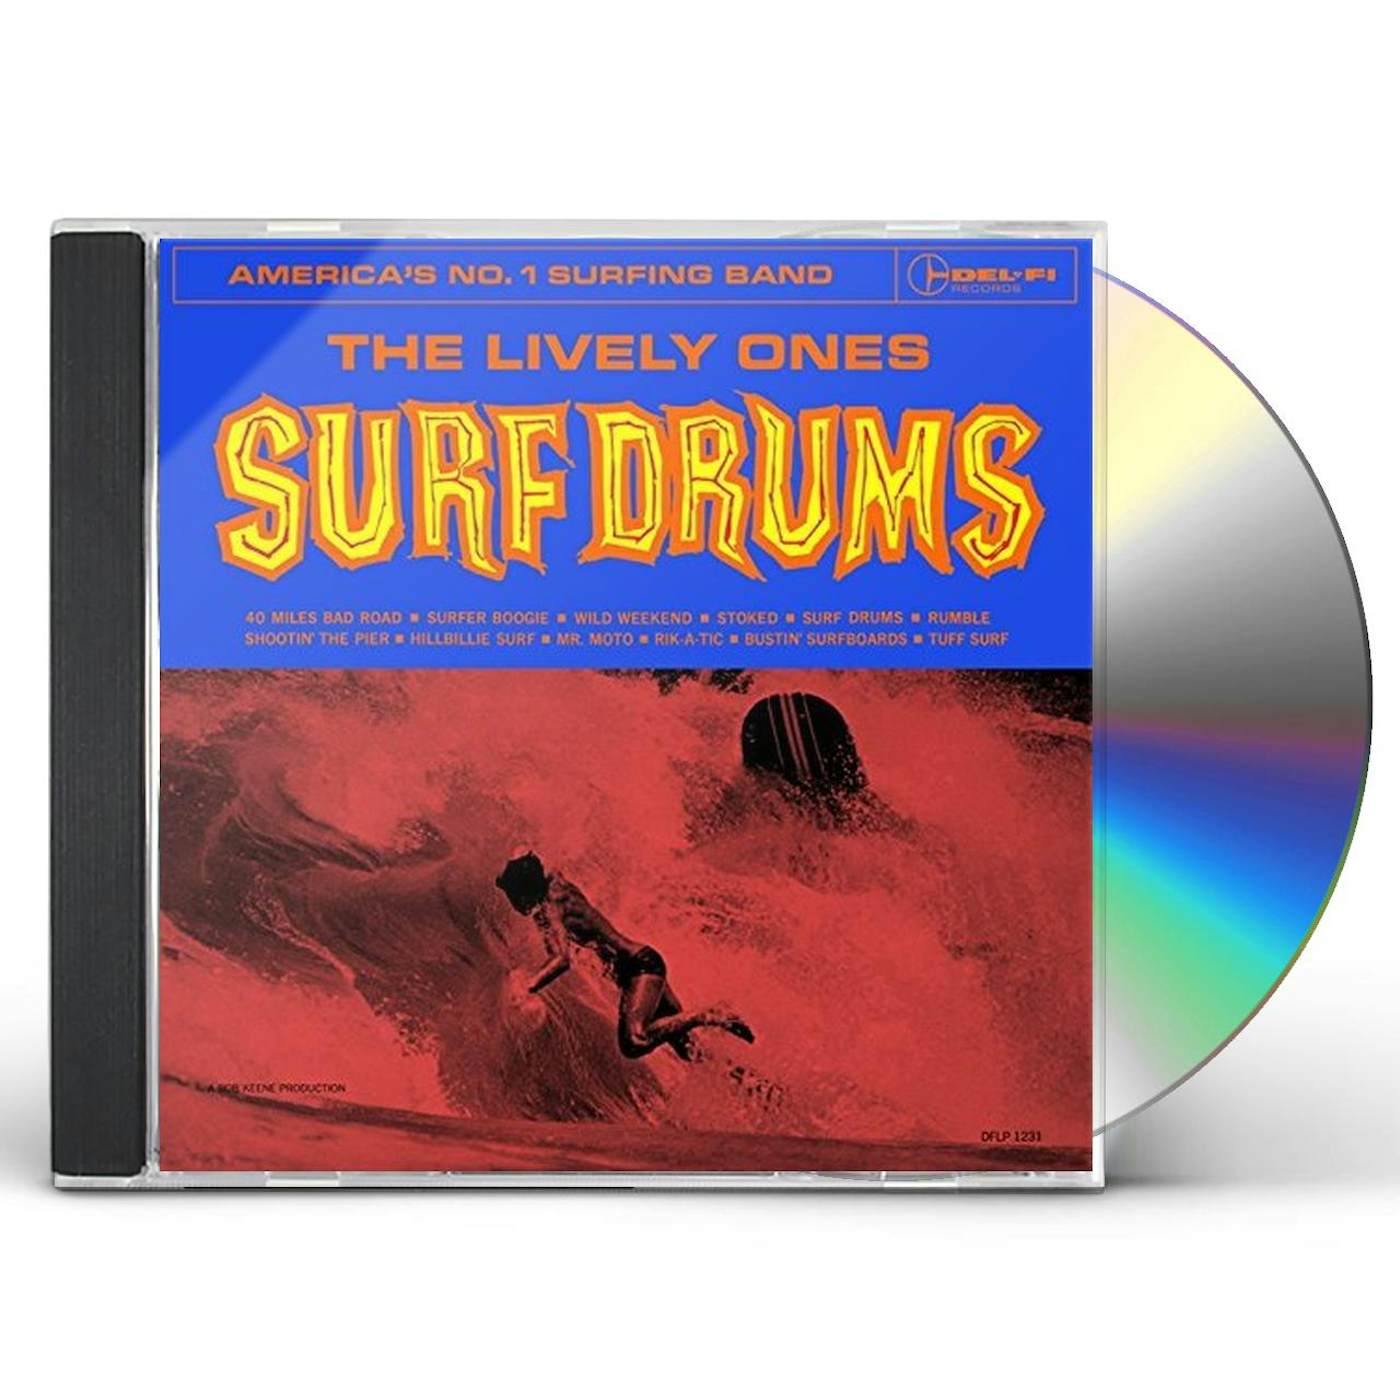 The Lively Ones SURF DRUMS CD